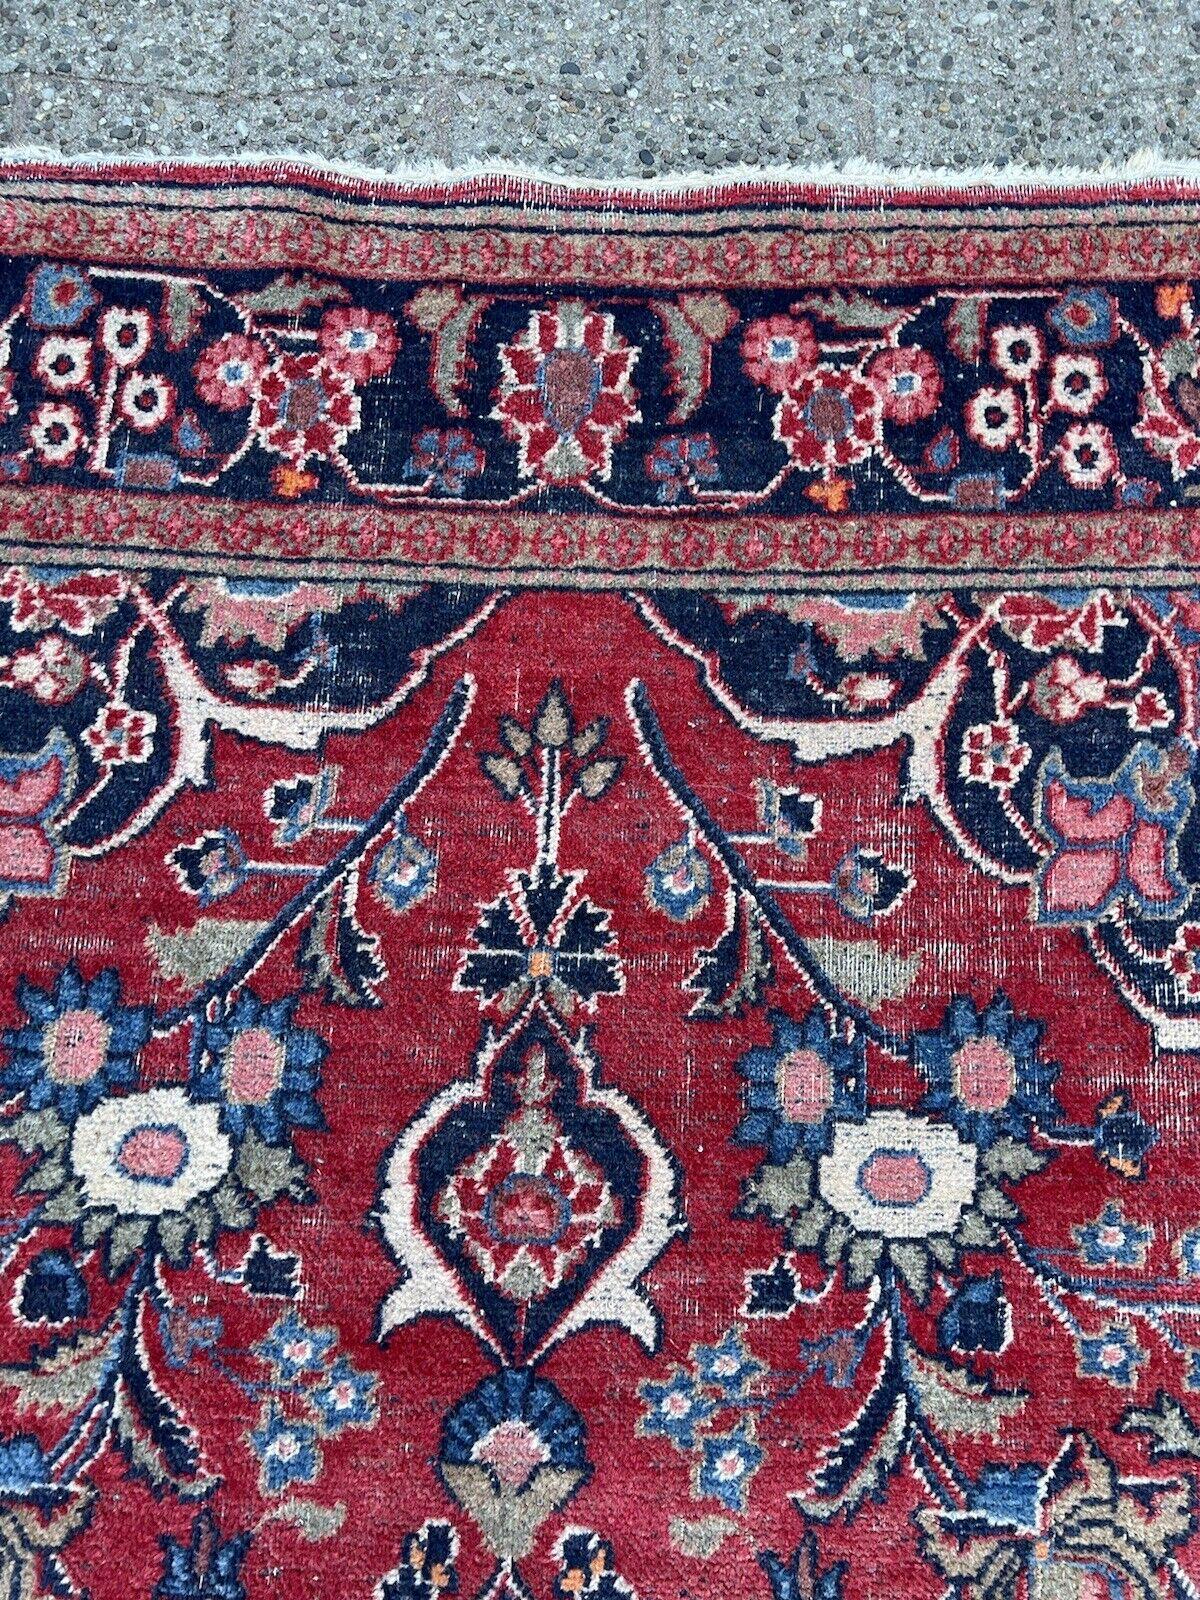 Handmade Antique Persian Style Kashan Rug 4.4' x 6.5', 1920s - 1S43 For Sale 4